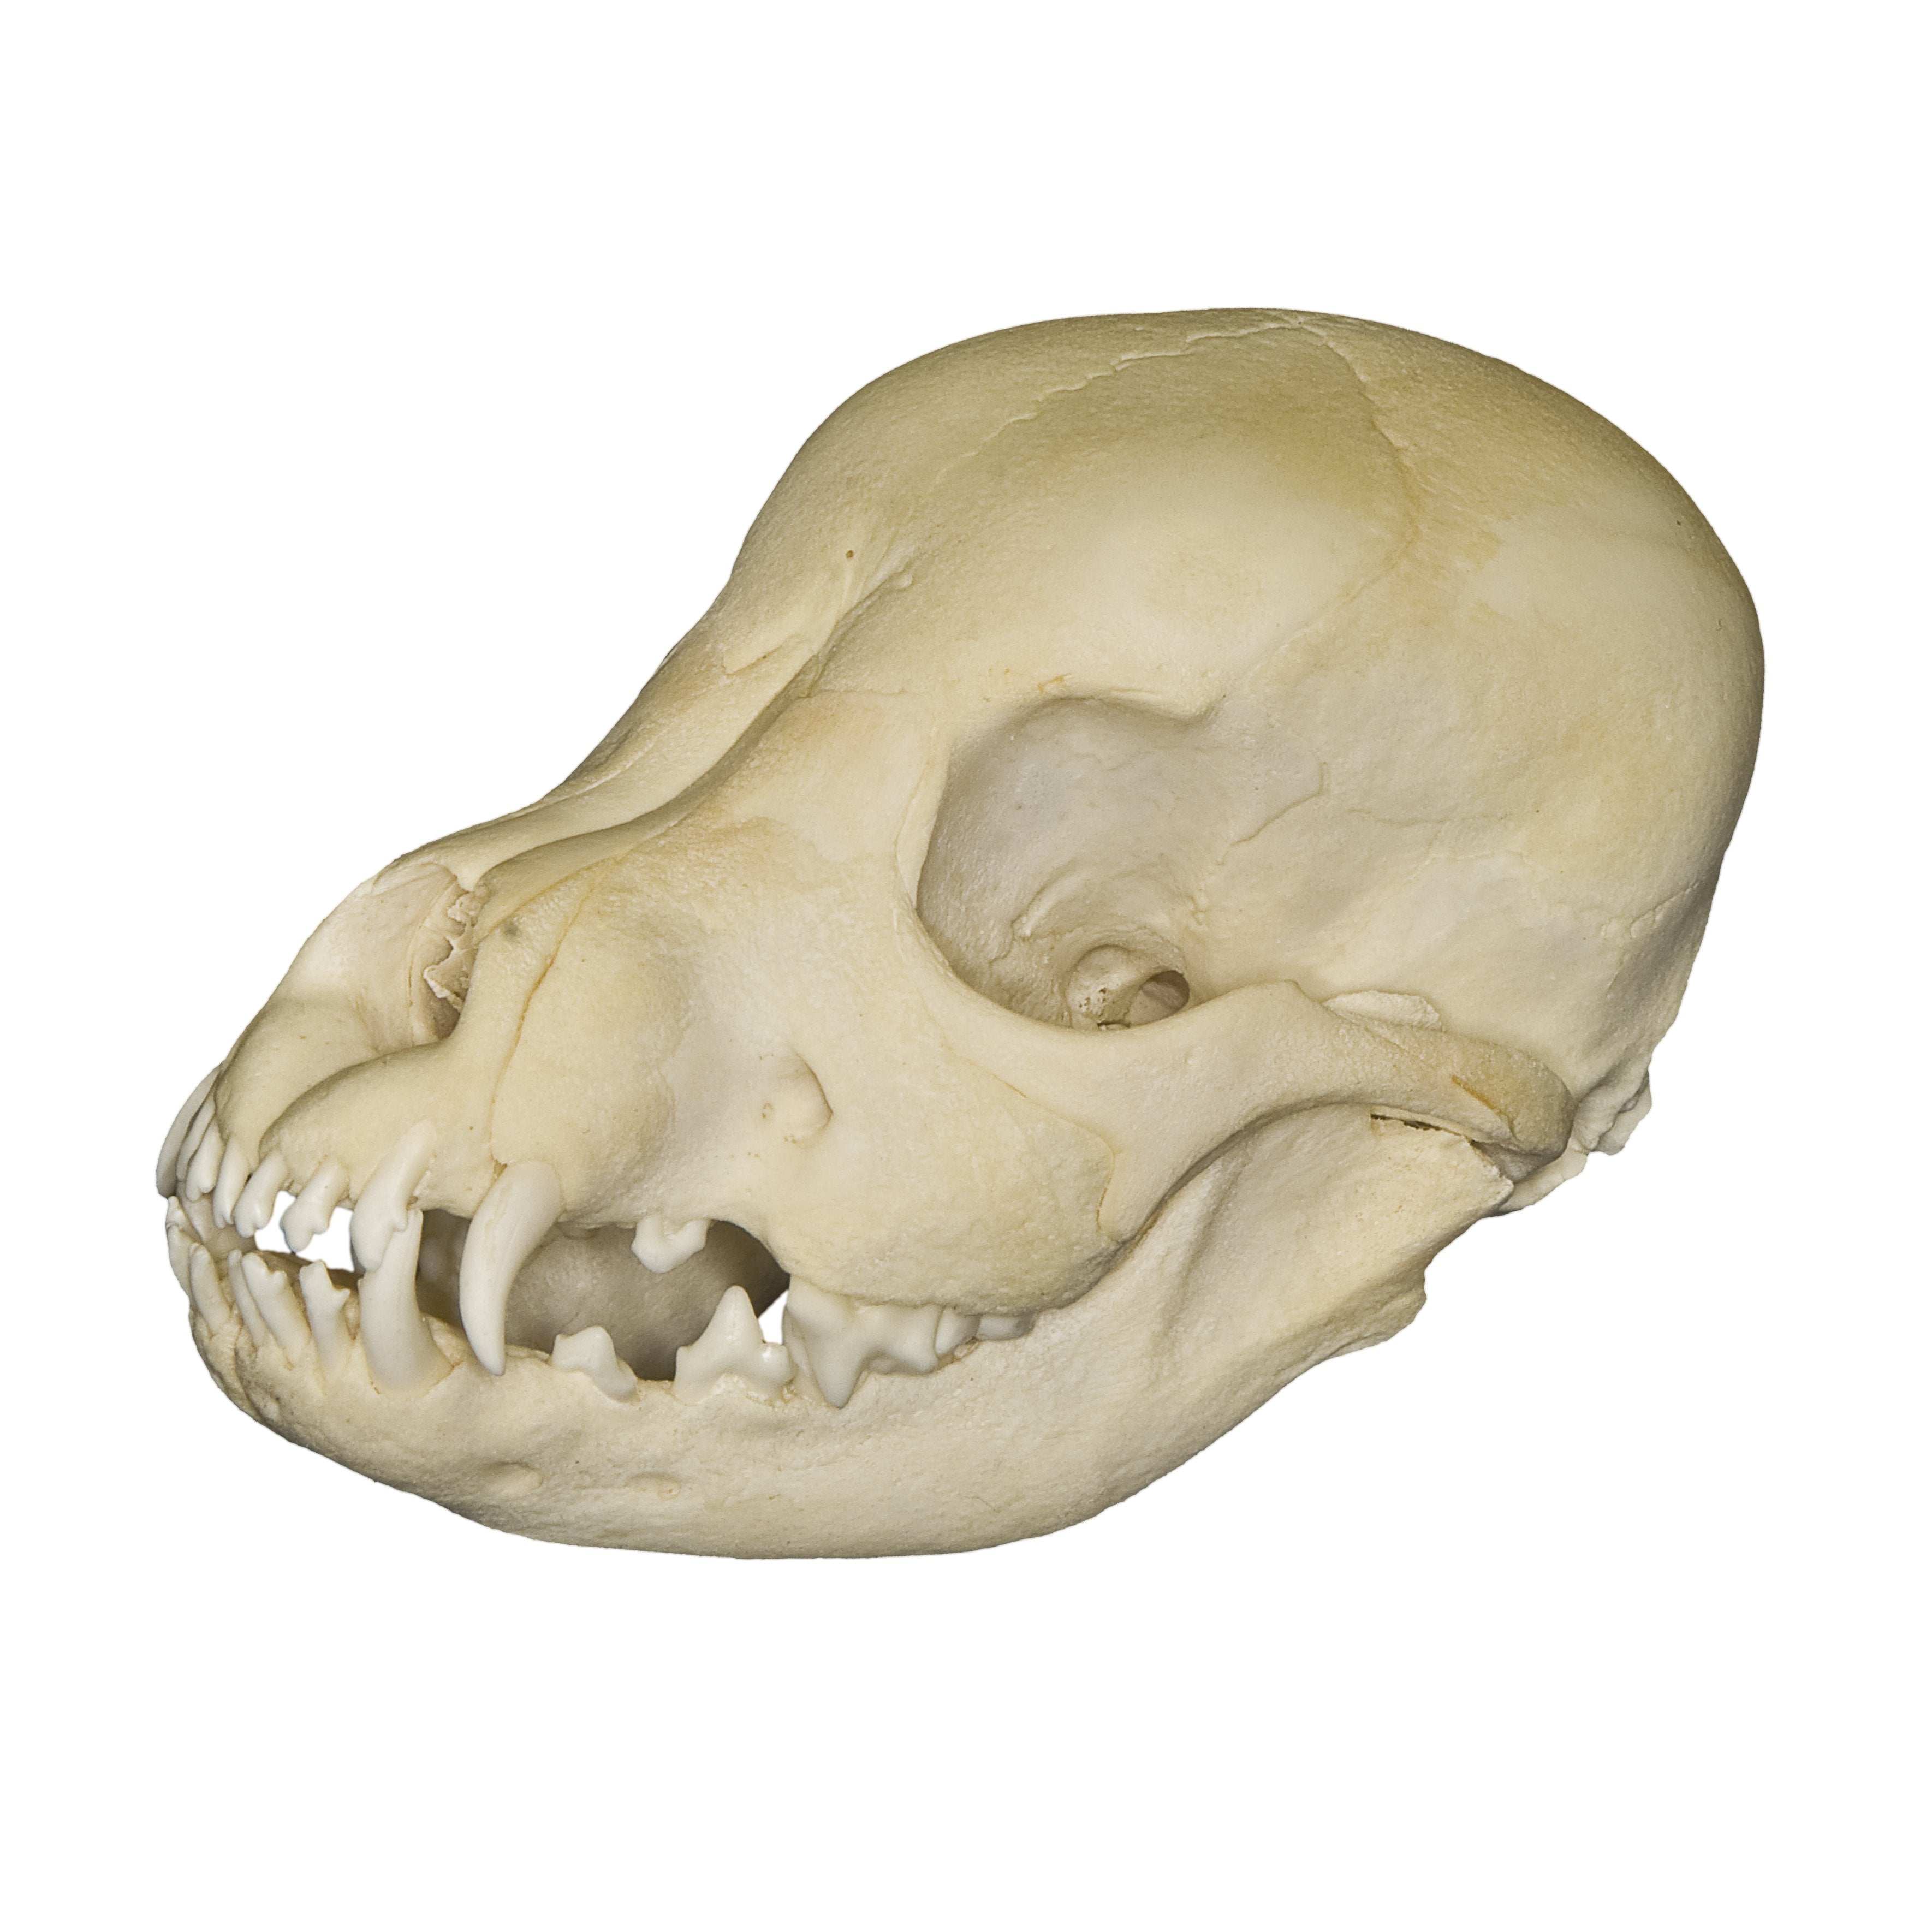 Real Domestic Dog Skull (Puppy) For 